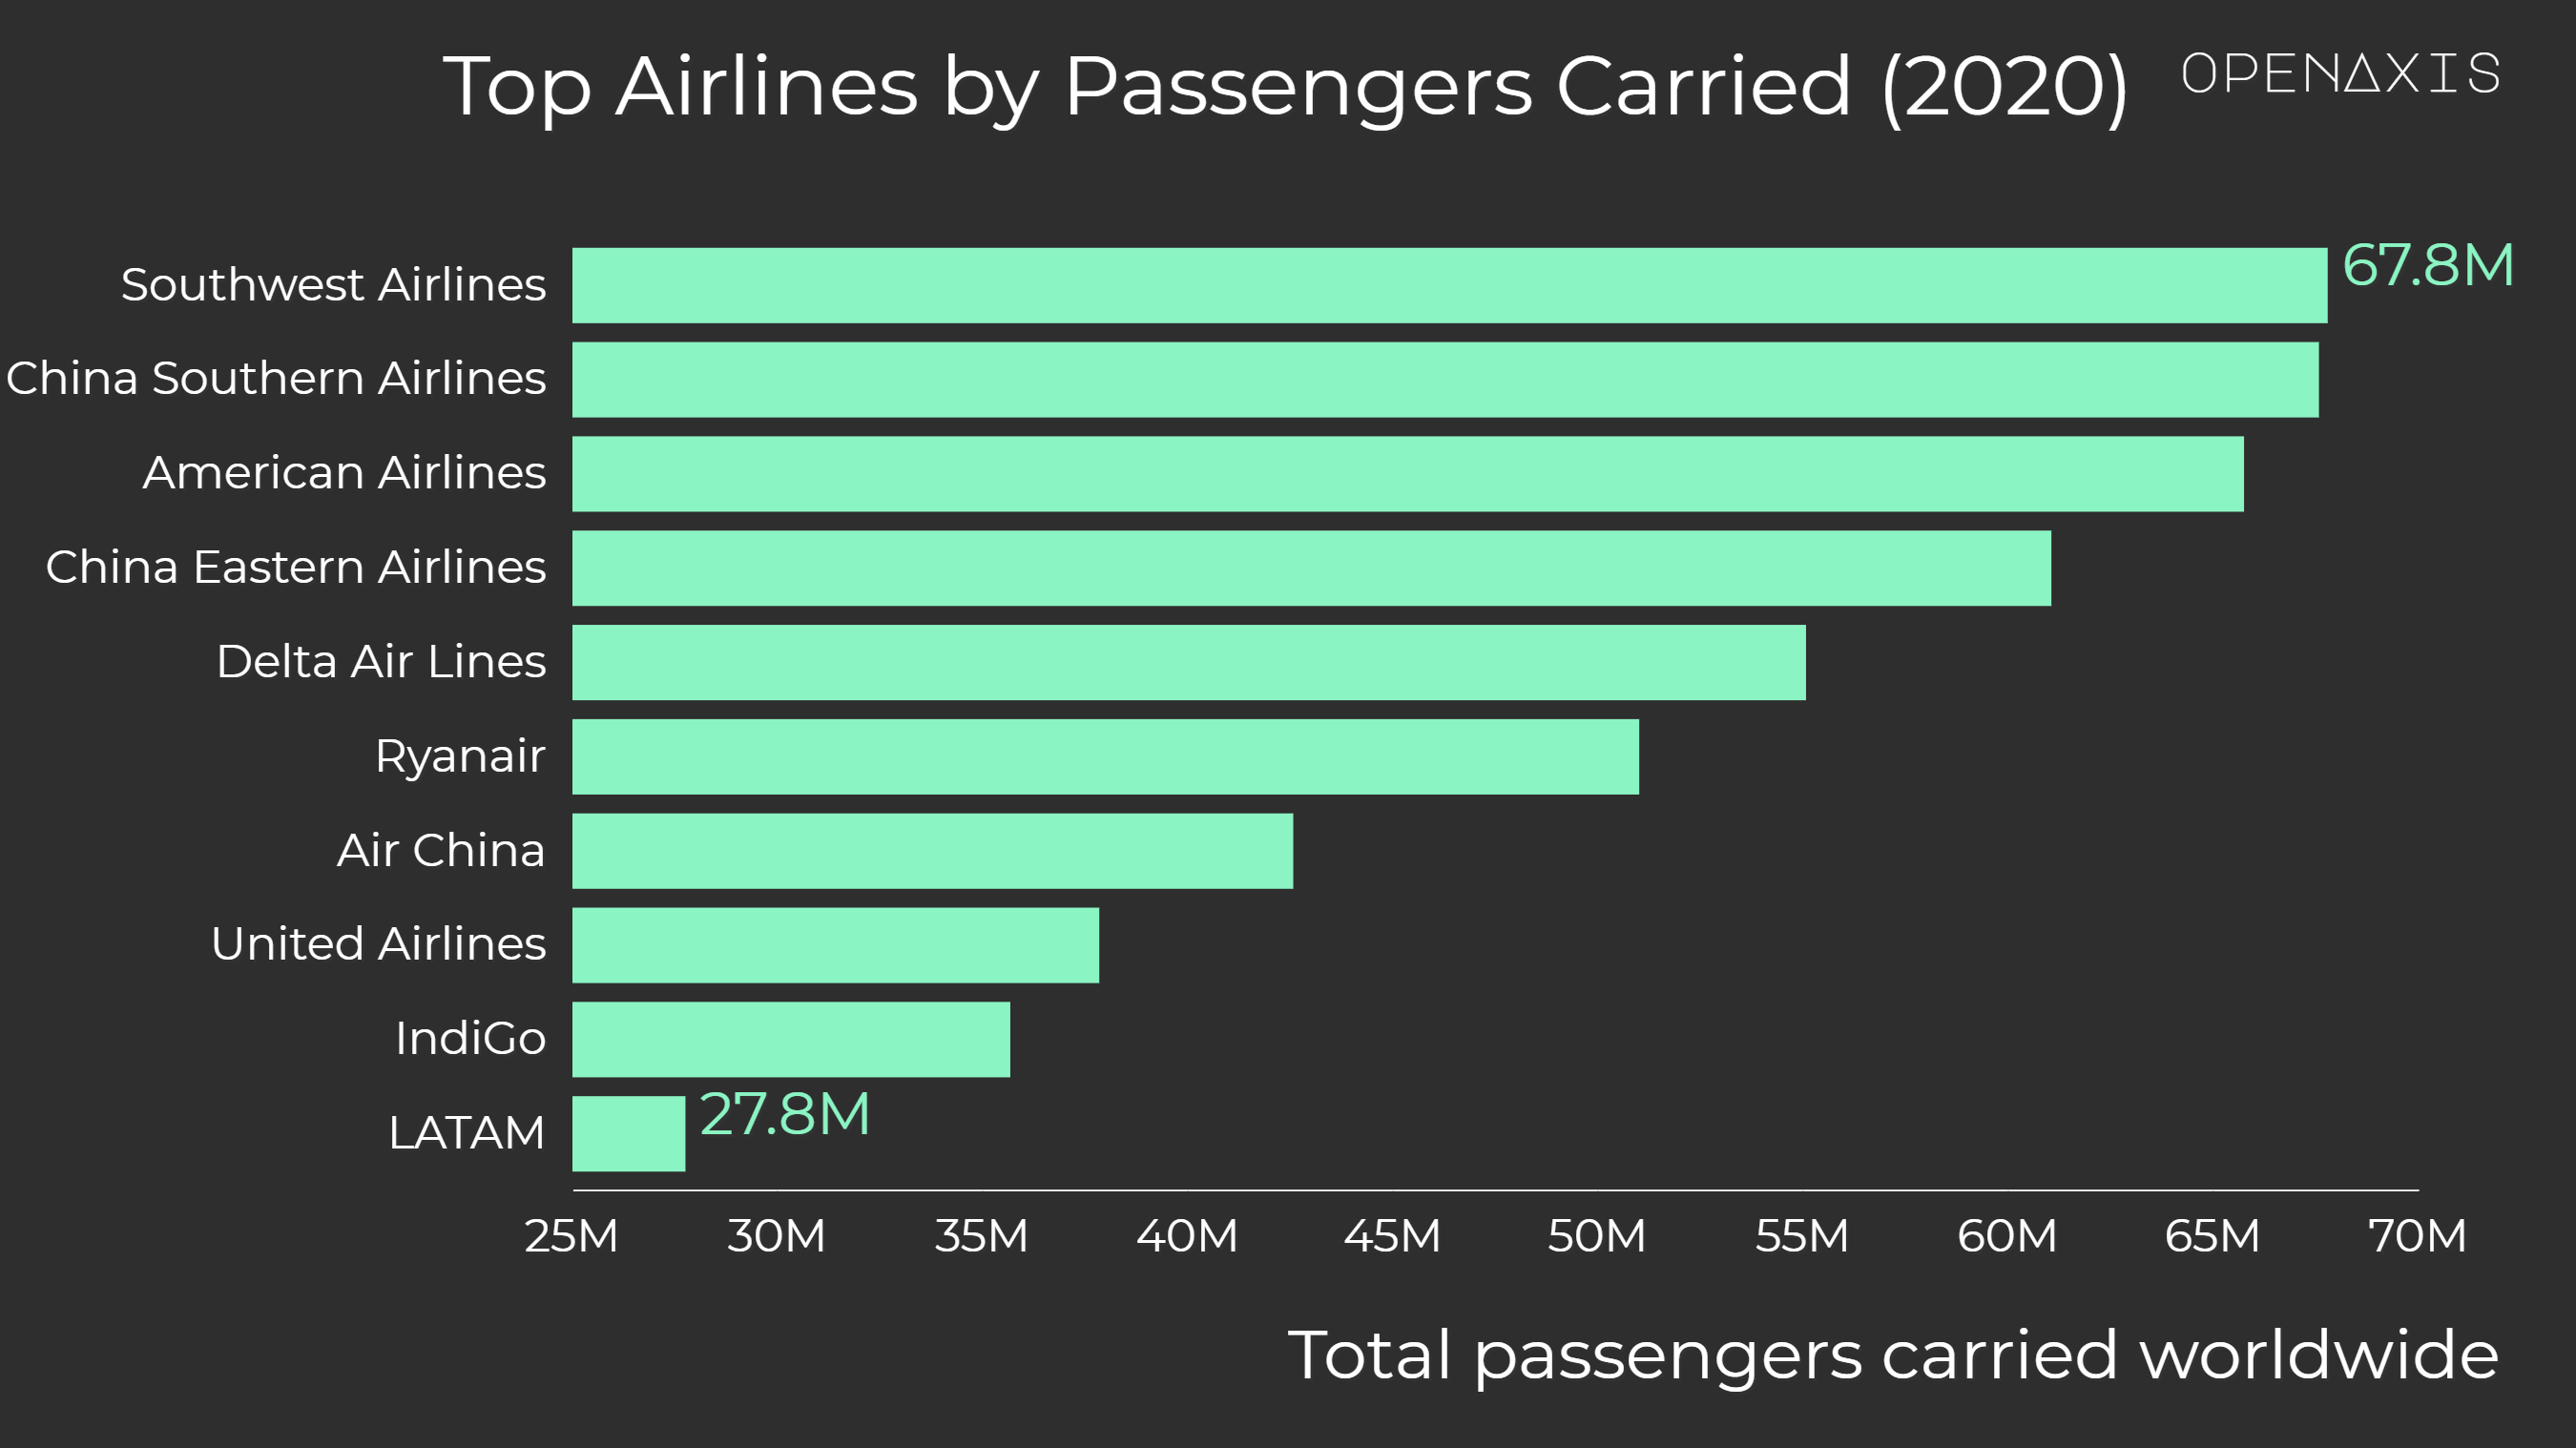 <p>Top 5 include American and Chinese airlines. The pandemic in 2020 had a devastating impact on the airline industry, which endured a 66% decrease in global air traffic that year.</p><p><br /></p><p>﻿<a href="/search?q=%23travel" target="_blank">#travel</a>﻿ ﻿<a href="/search?q=%23tourism" target="_blank">#tourism</a>﻿</p><p><br /></p><p>Source: <a href="/data/3927" target="_blank">IATA</a></p><p><br /></p>